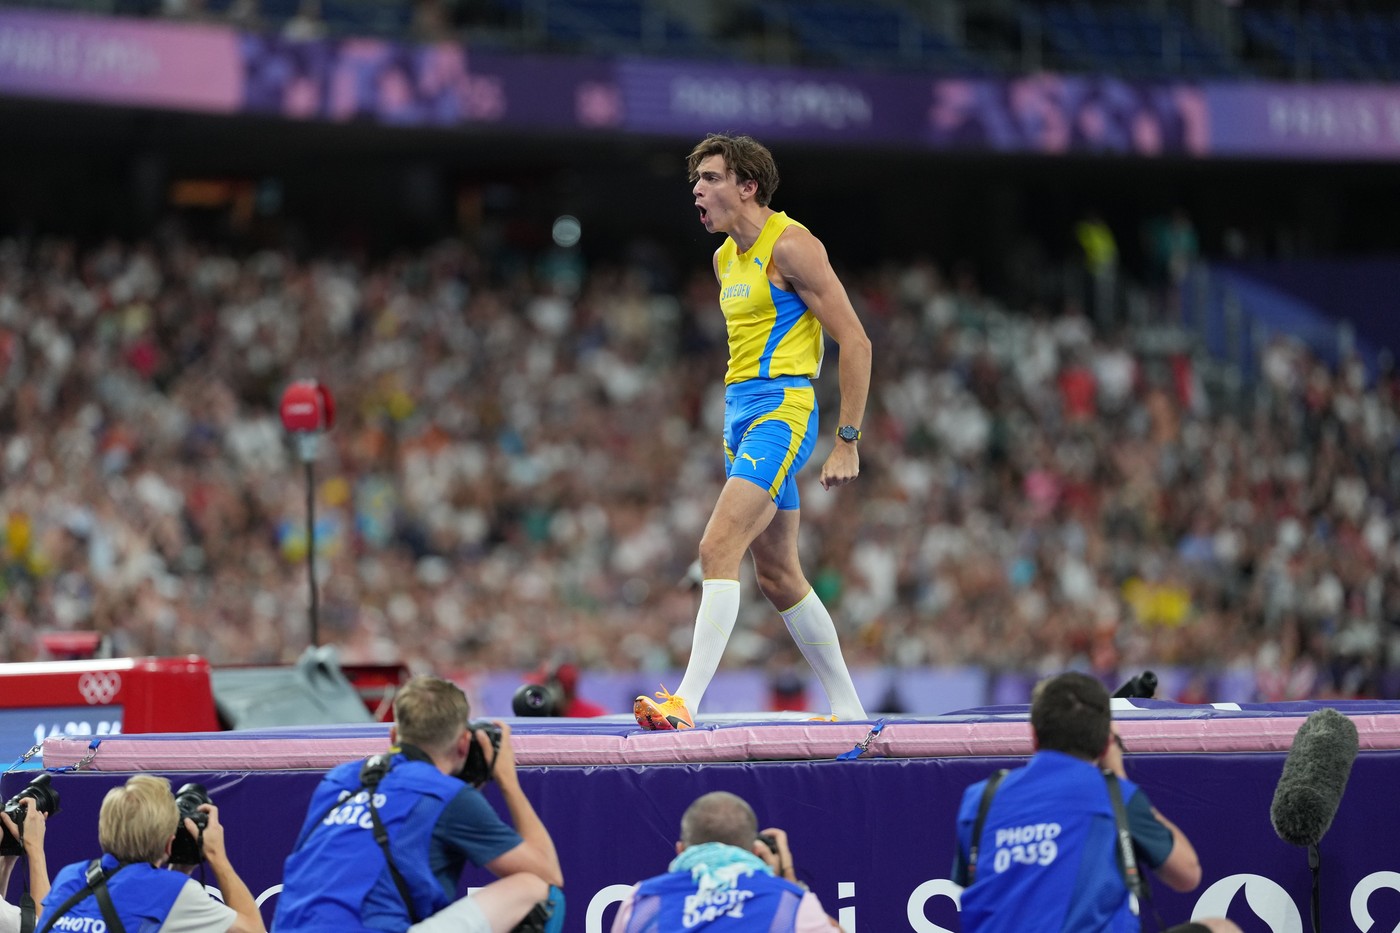 Armand Duplantis of Sweden wins gold and sets a new World Record in the Men's Pole Vault
Paris 2024 Olympic Games, Day Ten, Paris, France - 05 Aug 2024,Image: 896314486, License: Rights-managed, Restrictions: , Model Release: no